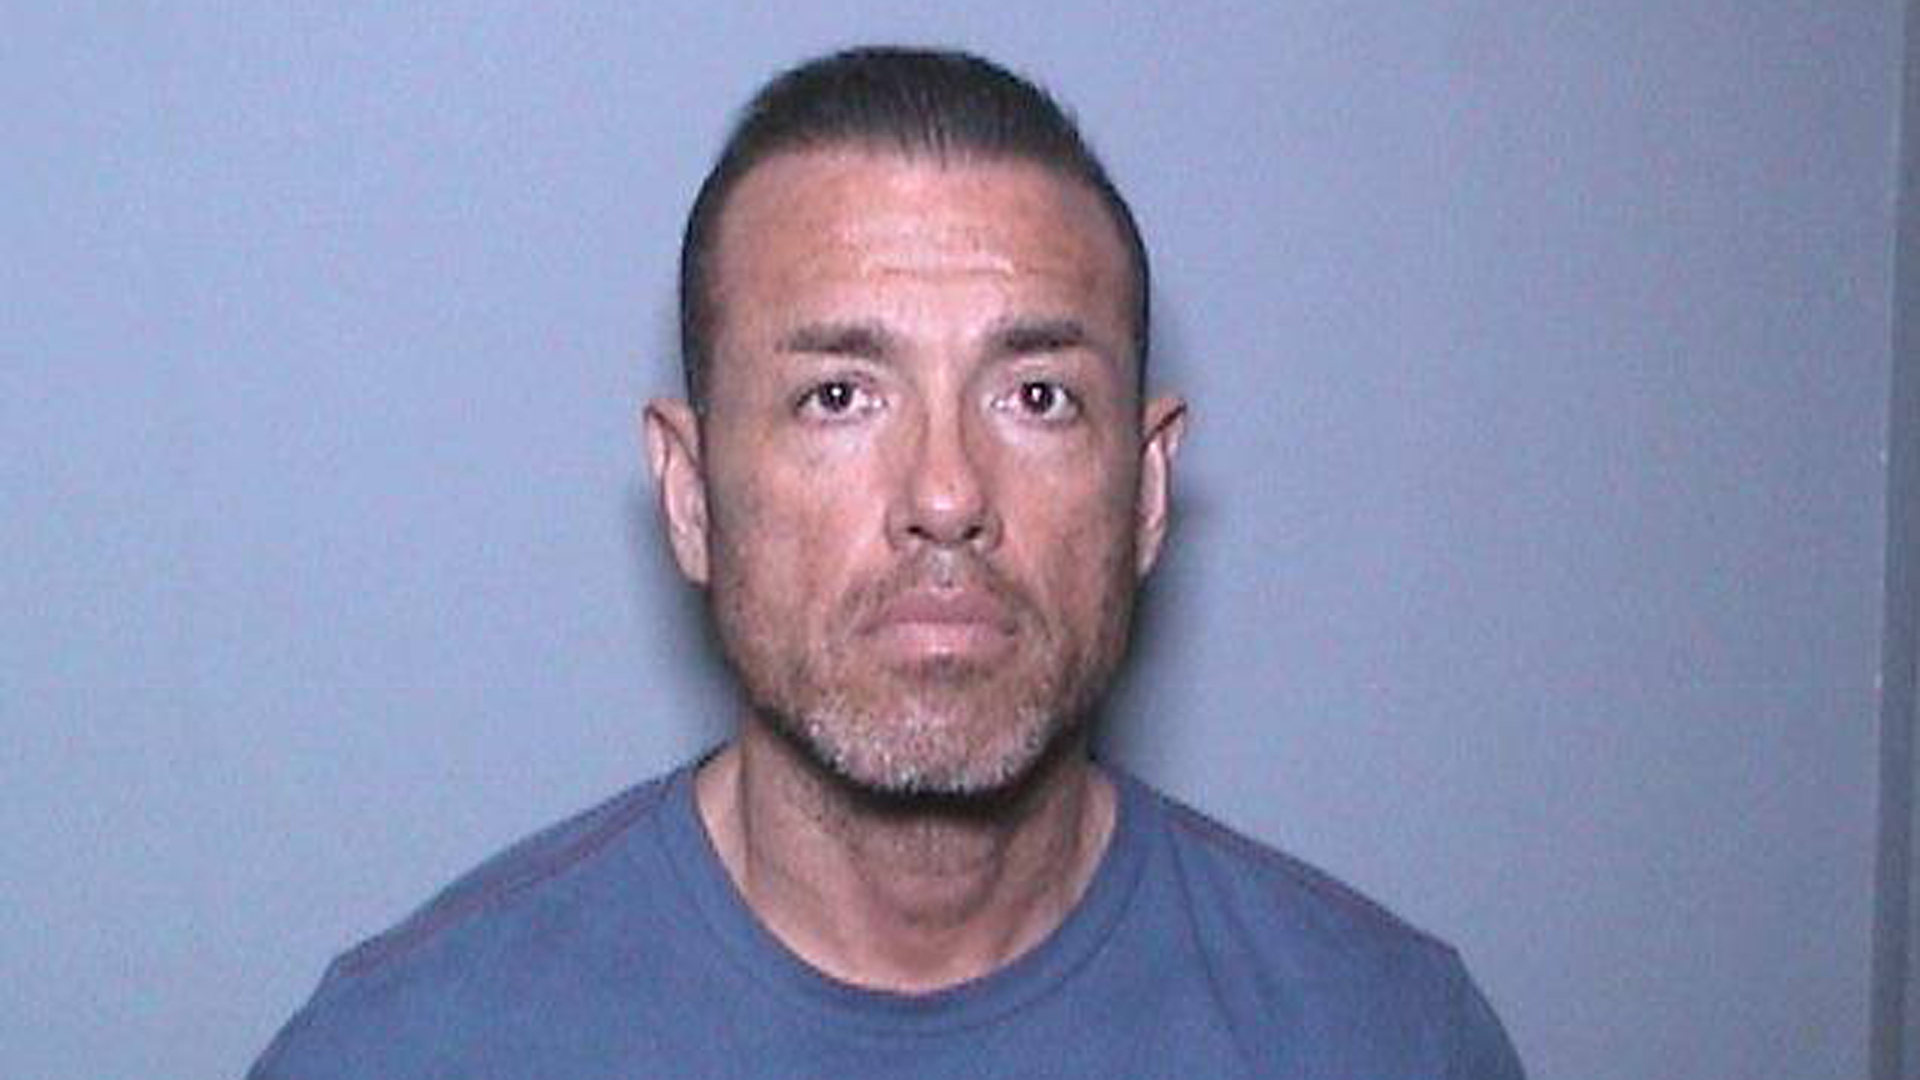 Carlos Francisco Juarez, 44, is seen in an undated booking photo provided by the Irvine Police Department.